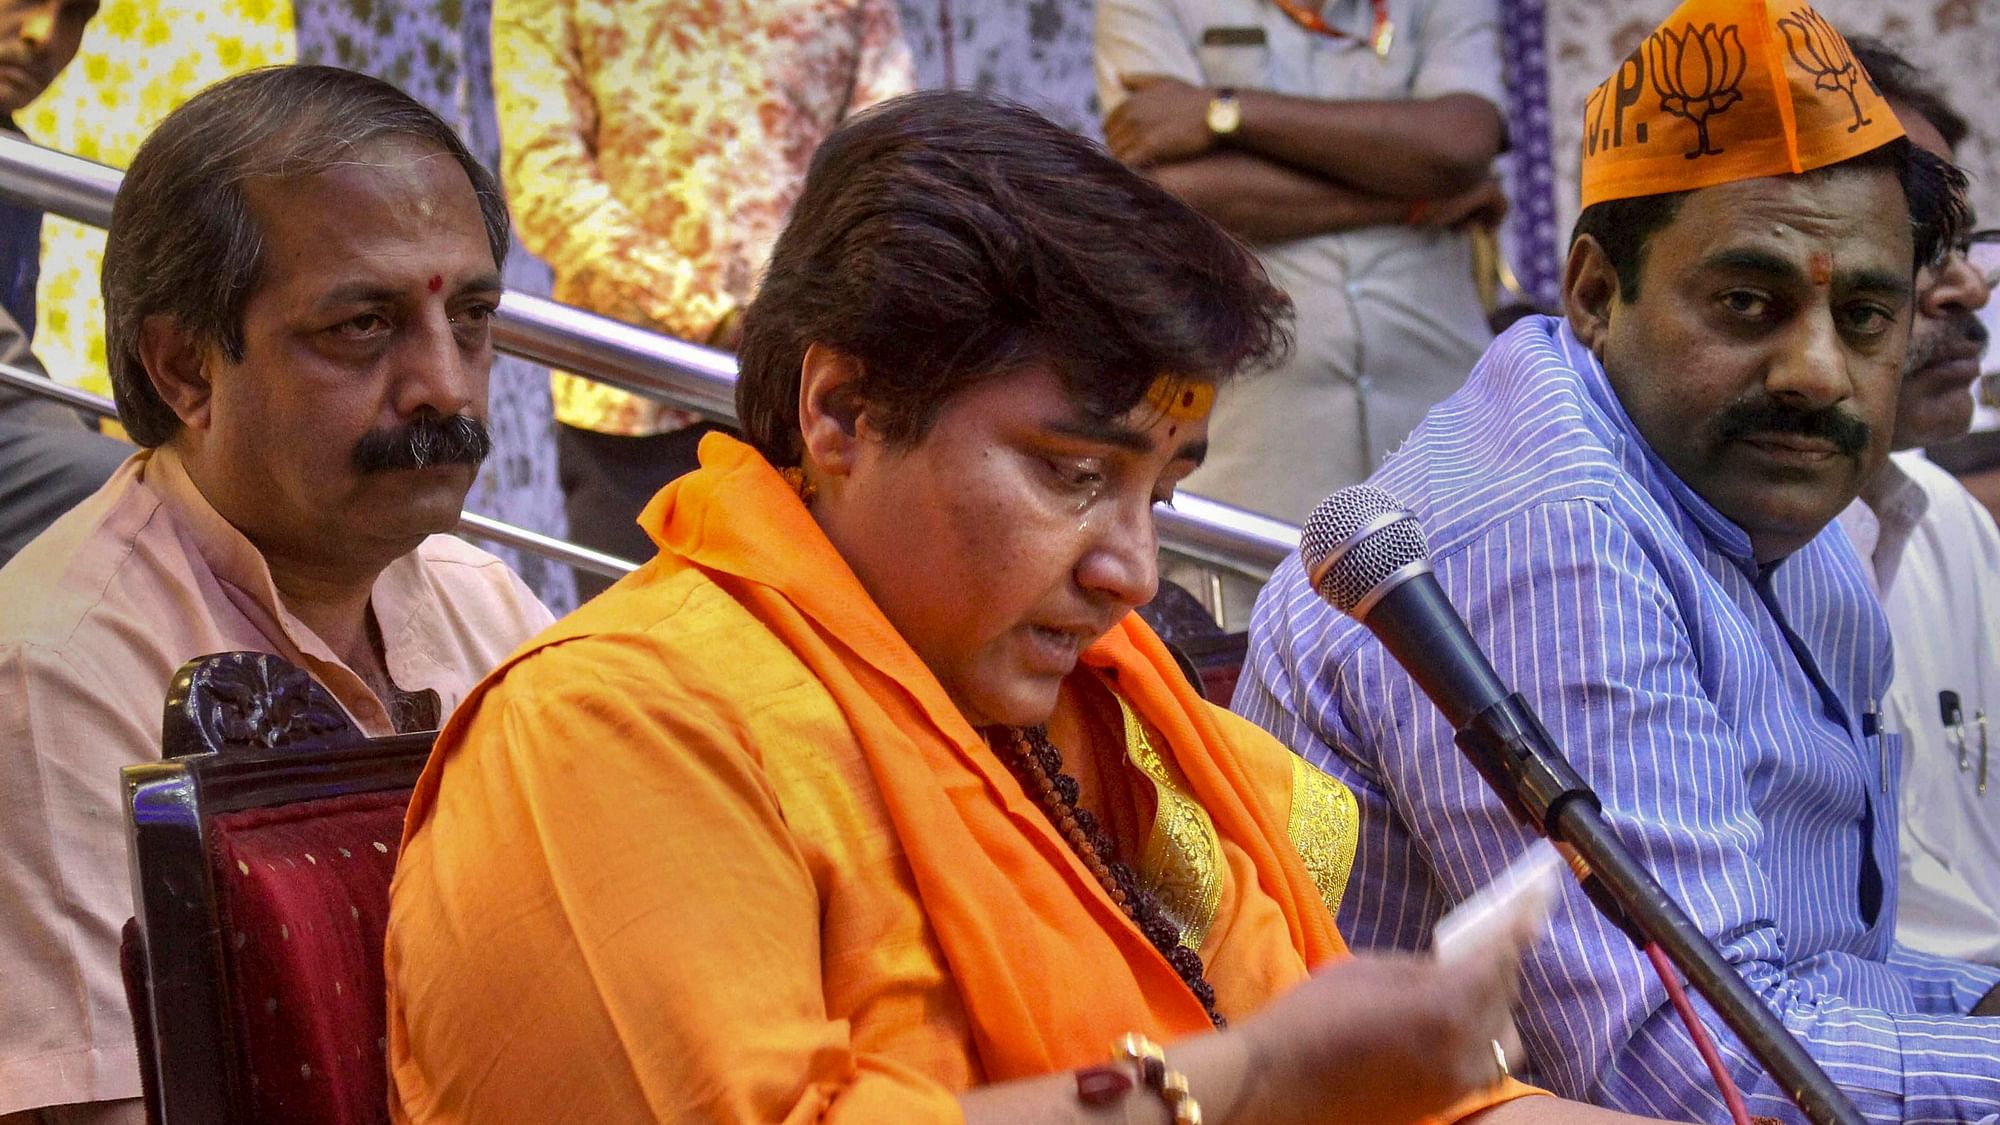 BJP candidate Sadhvi Pragya Singh Thakur reacts while addressing party workers for the Lok Sabha polls in Bhopal on 18 April.